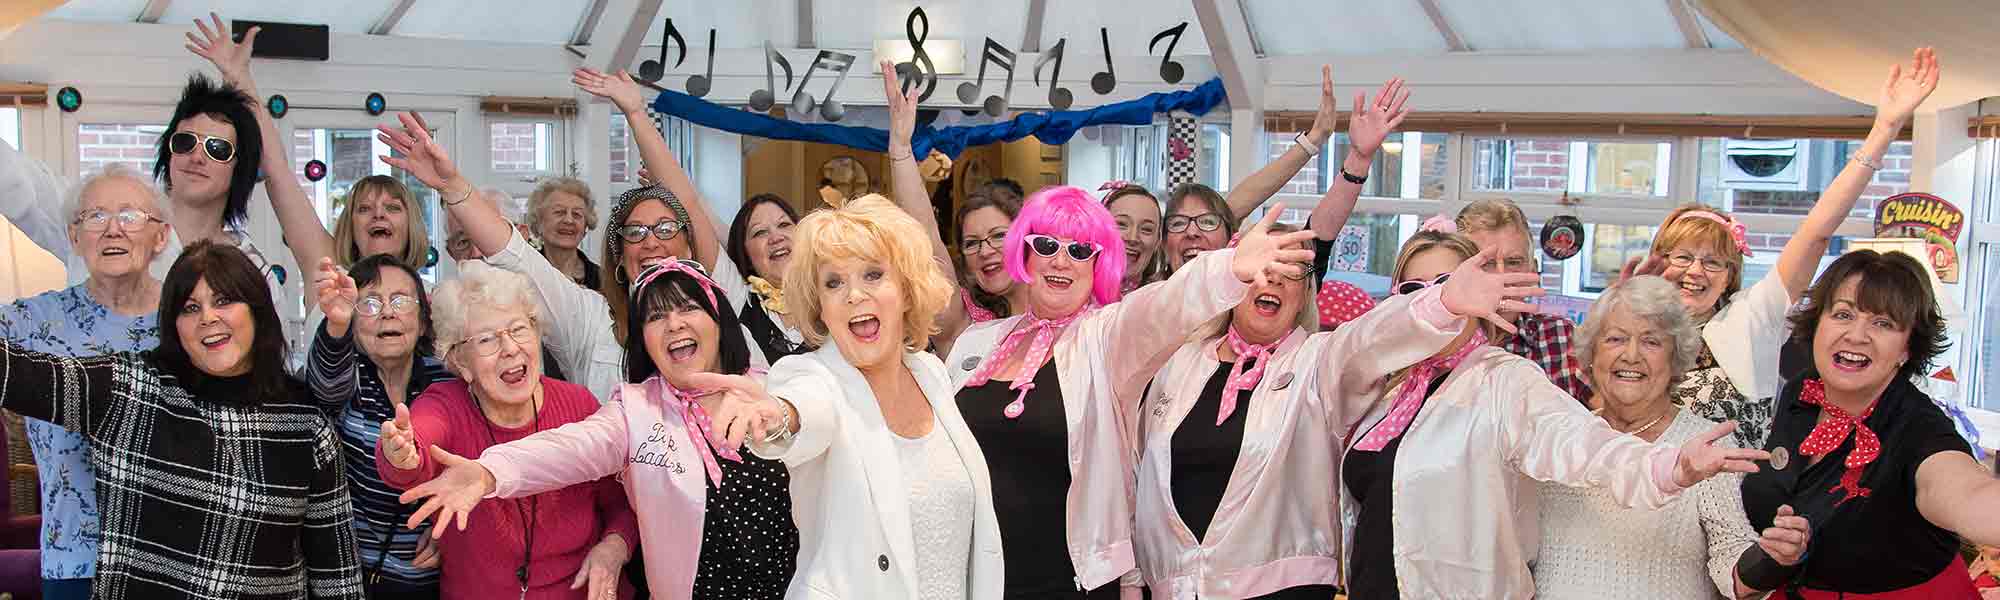 Loxley Park Assisted Living 1950s rockabilly pink ladies sherrie hewson staff celebrate banner hero